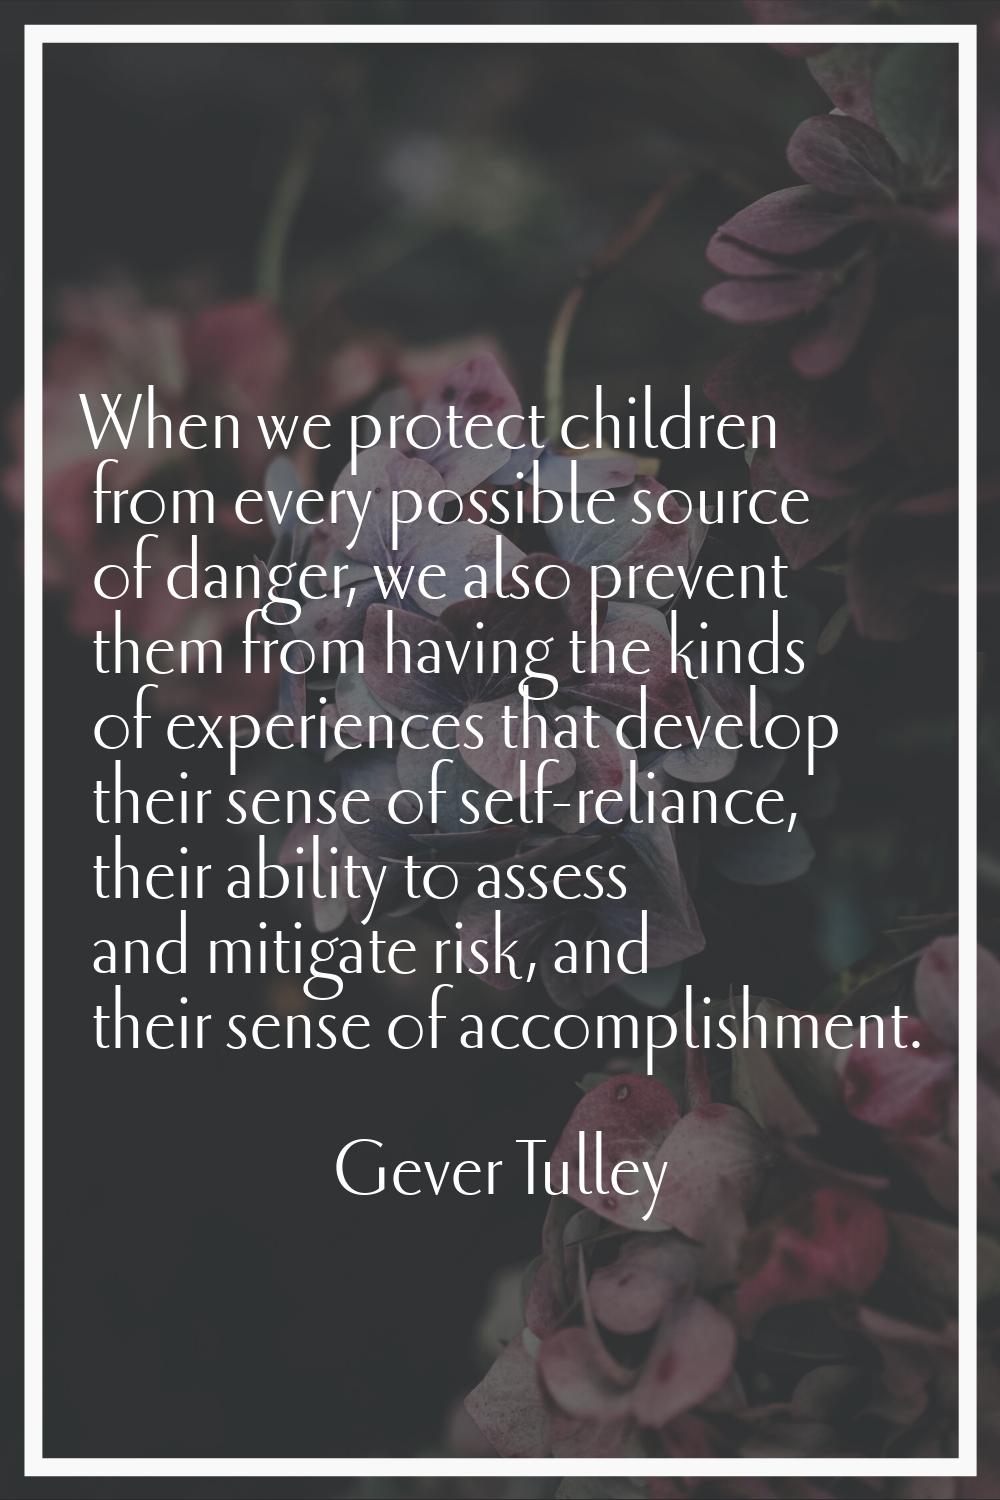 When we protect children from every possible source of danger, we also prevent them from having the